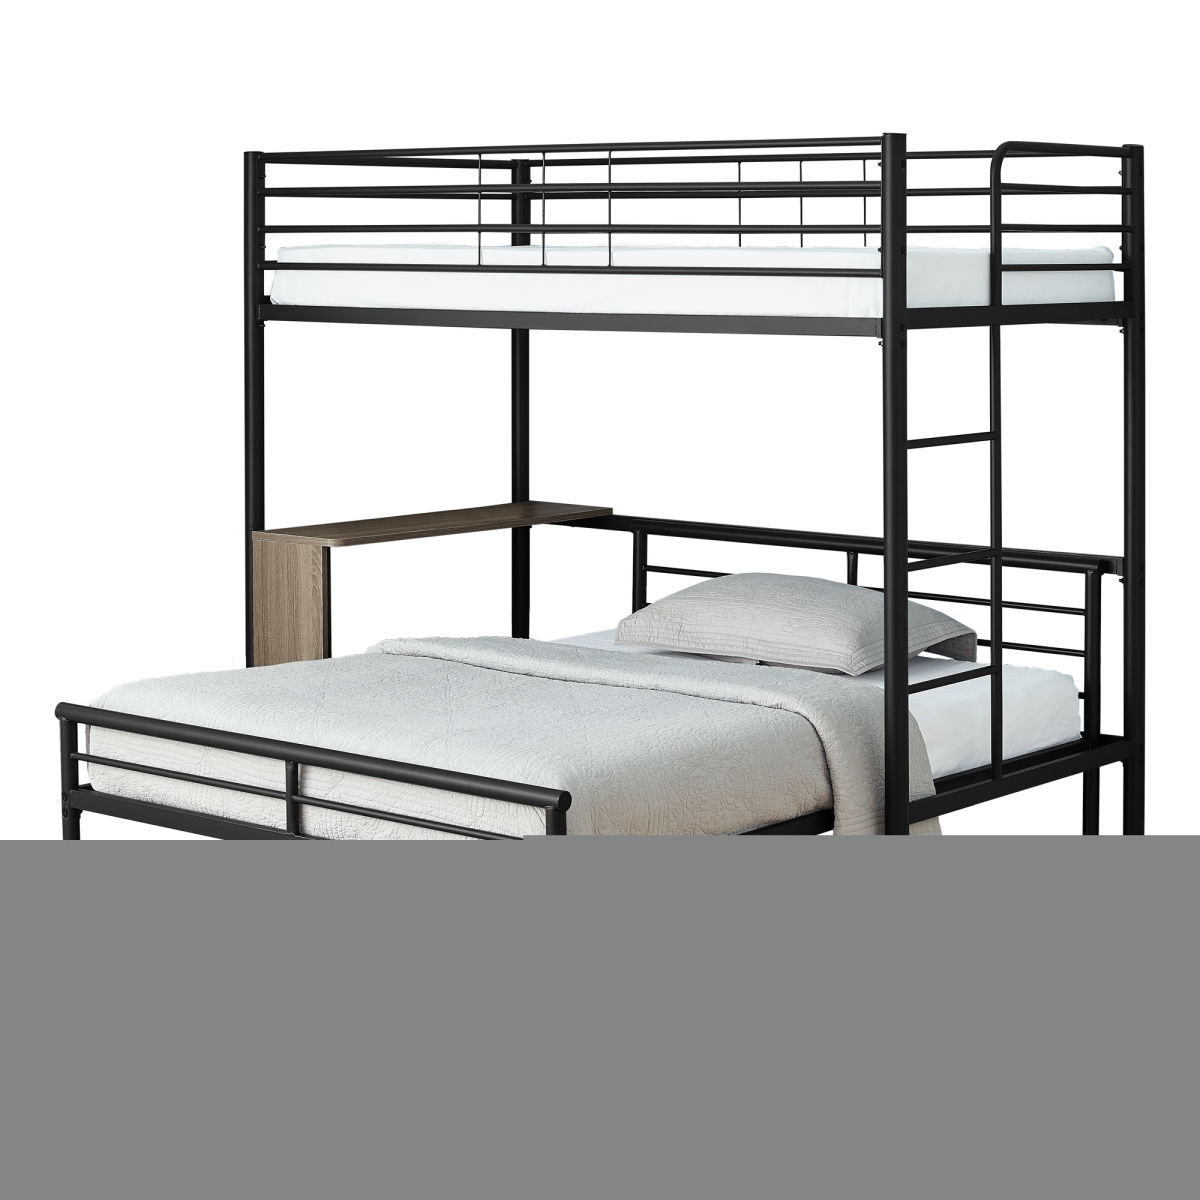 I 2240b 78.5 X 77.5 X 68.5 In. Bunk Bed Taupe Desk - Black Metal -twin & Full Size